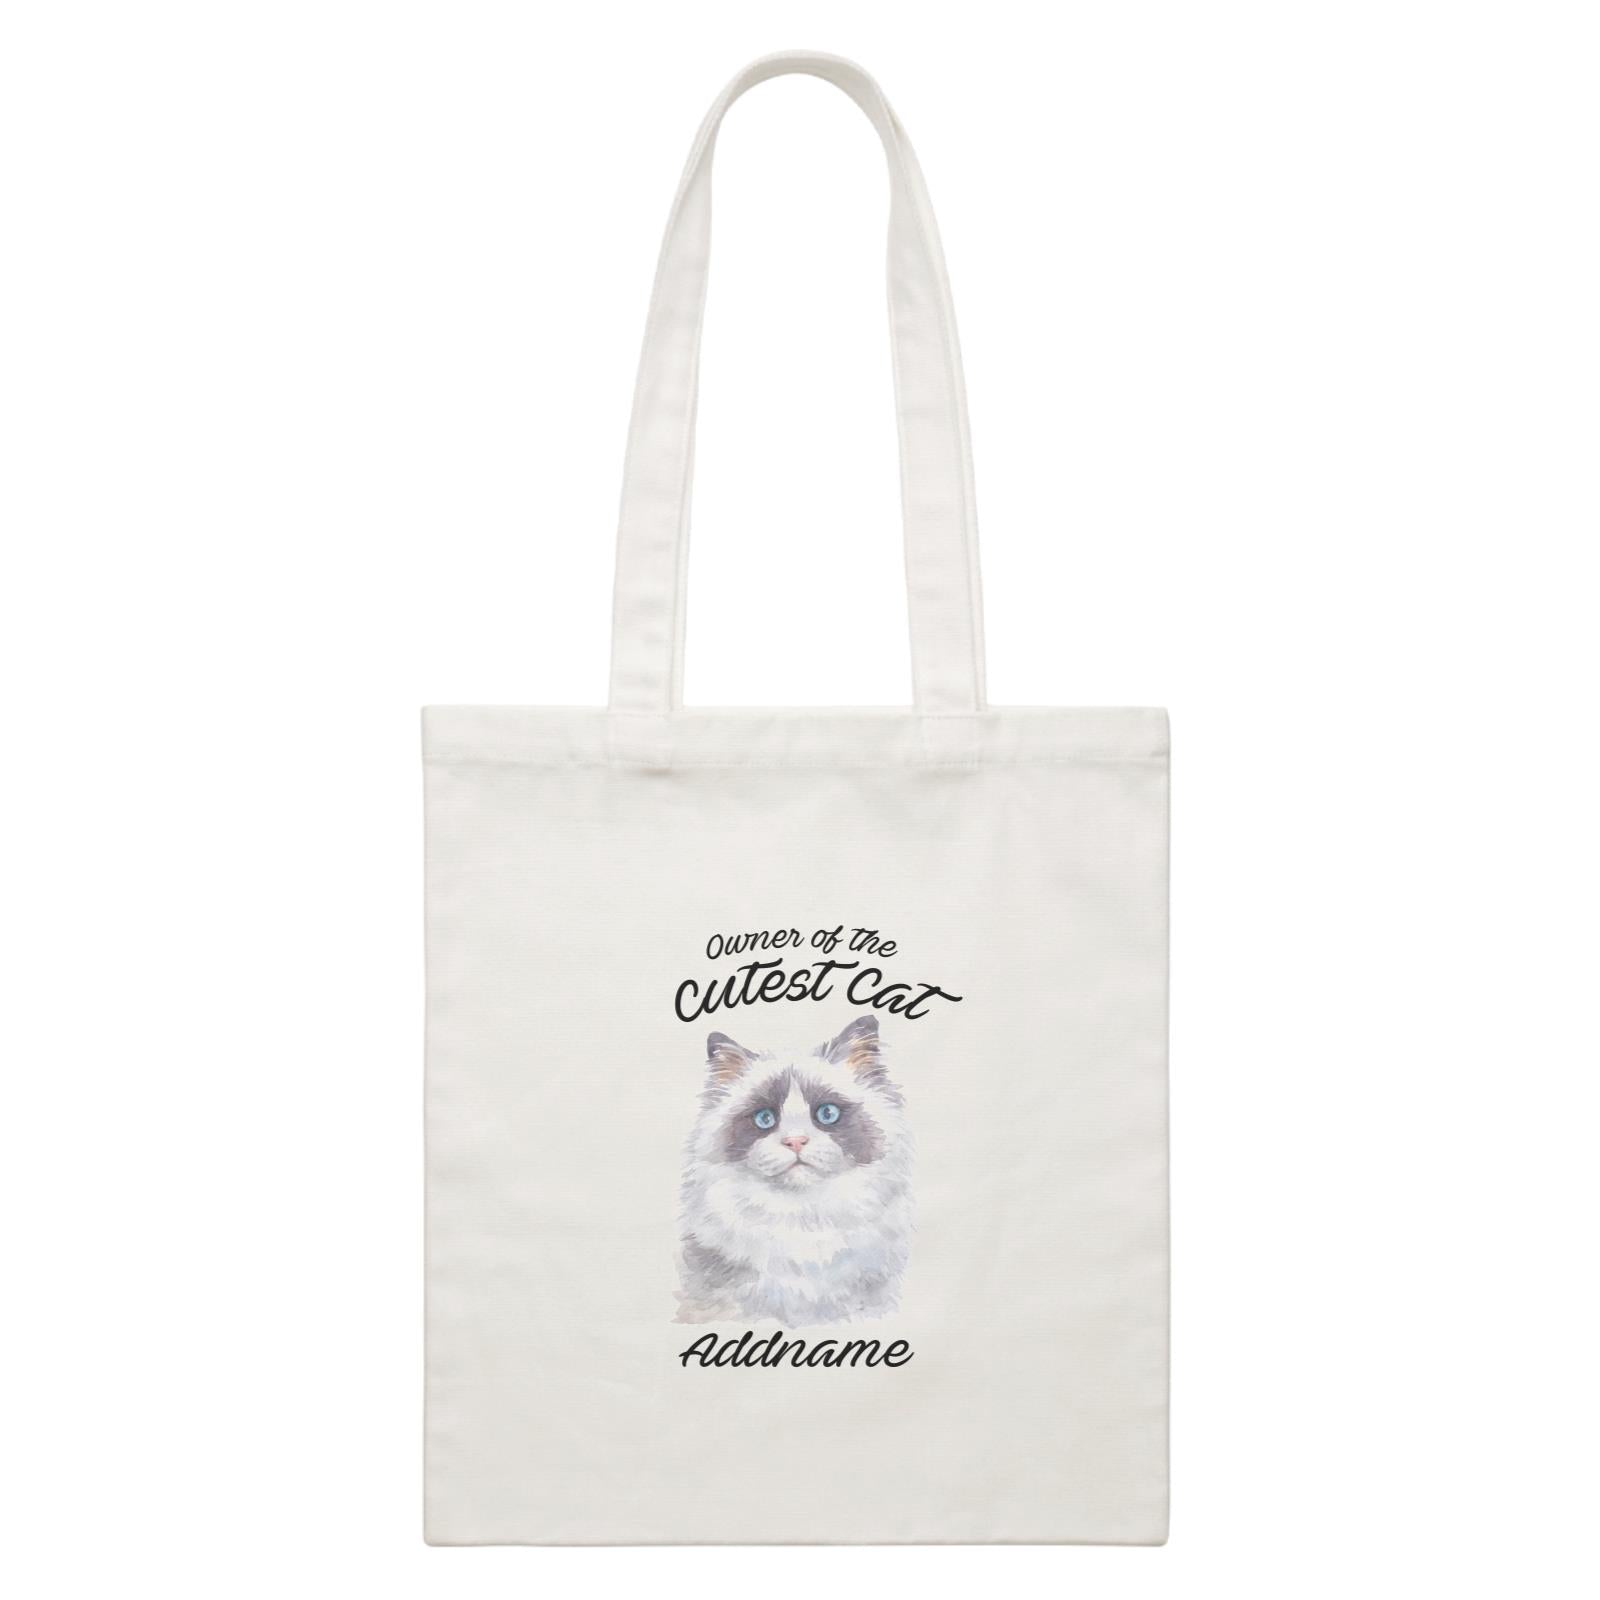 Watercolor Owner Of The Cutest Cat Ragdoll Cat Addname White Canvas Bag